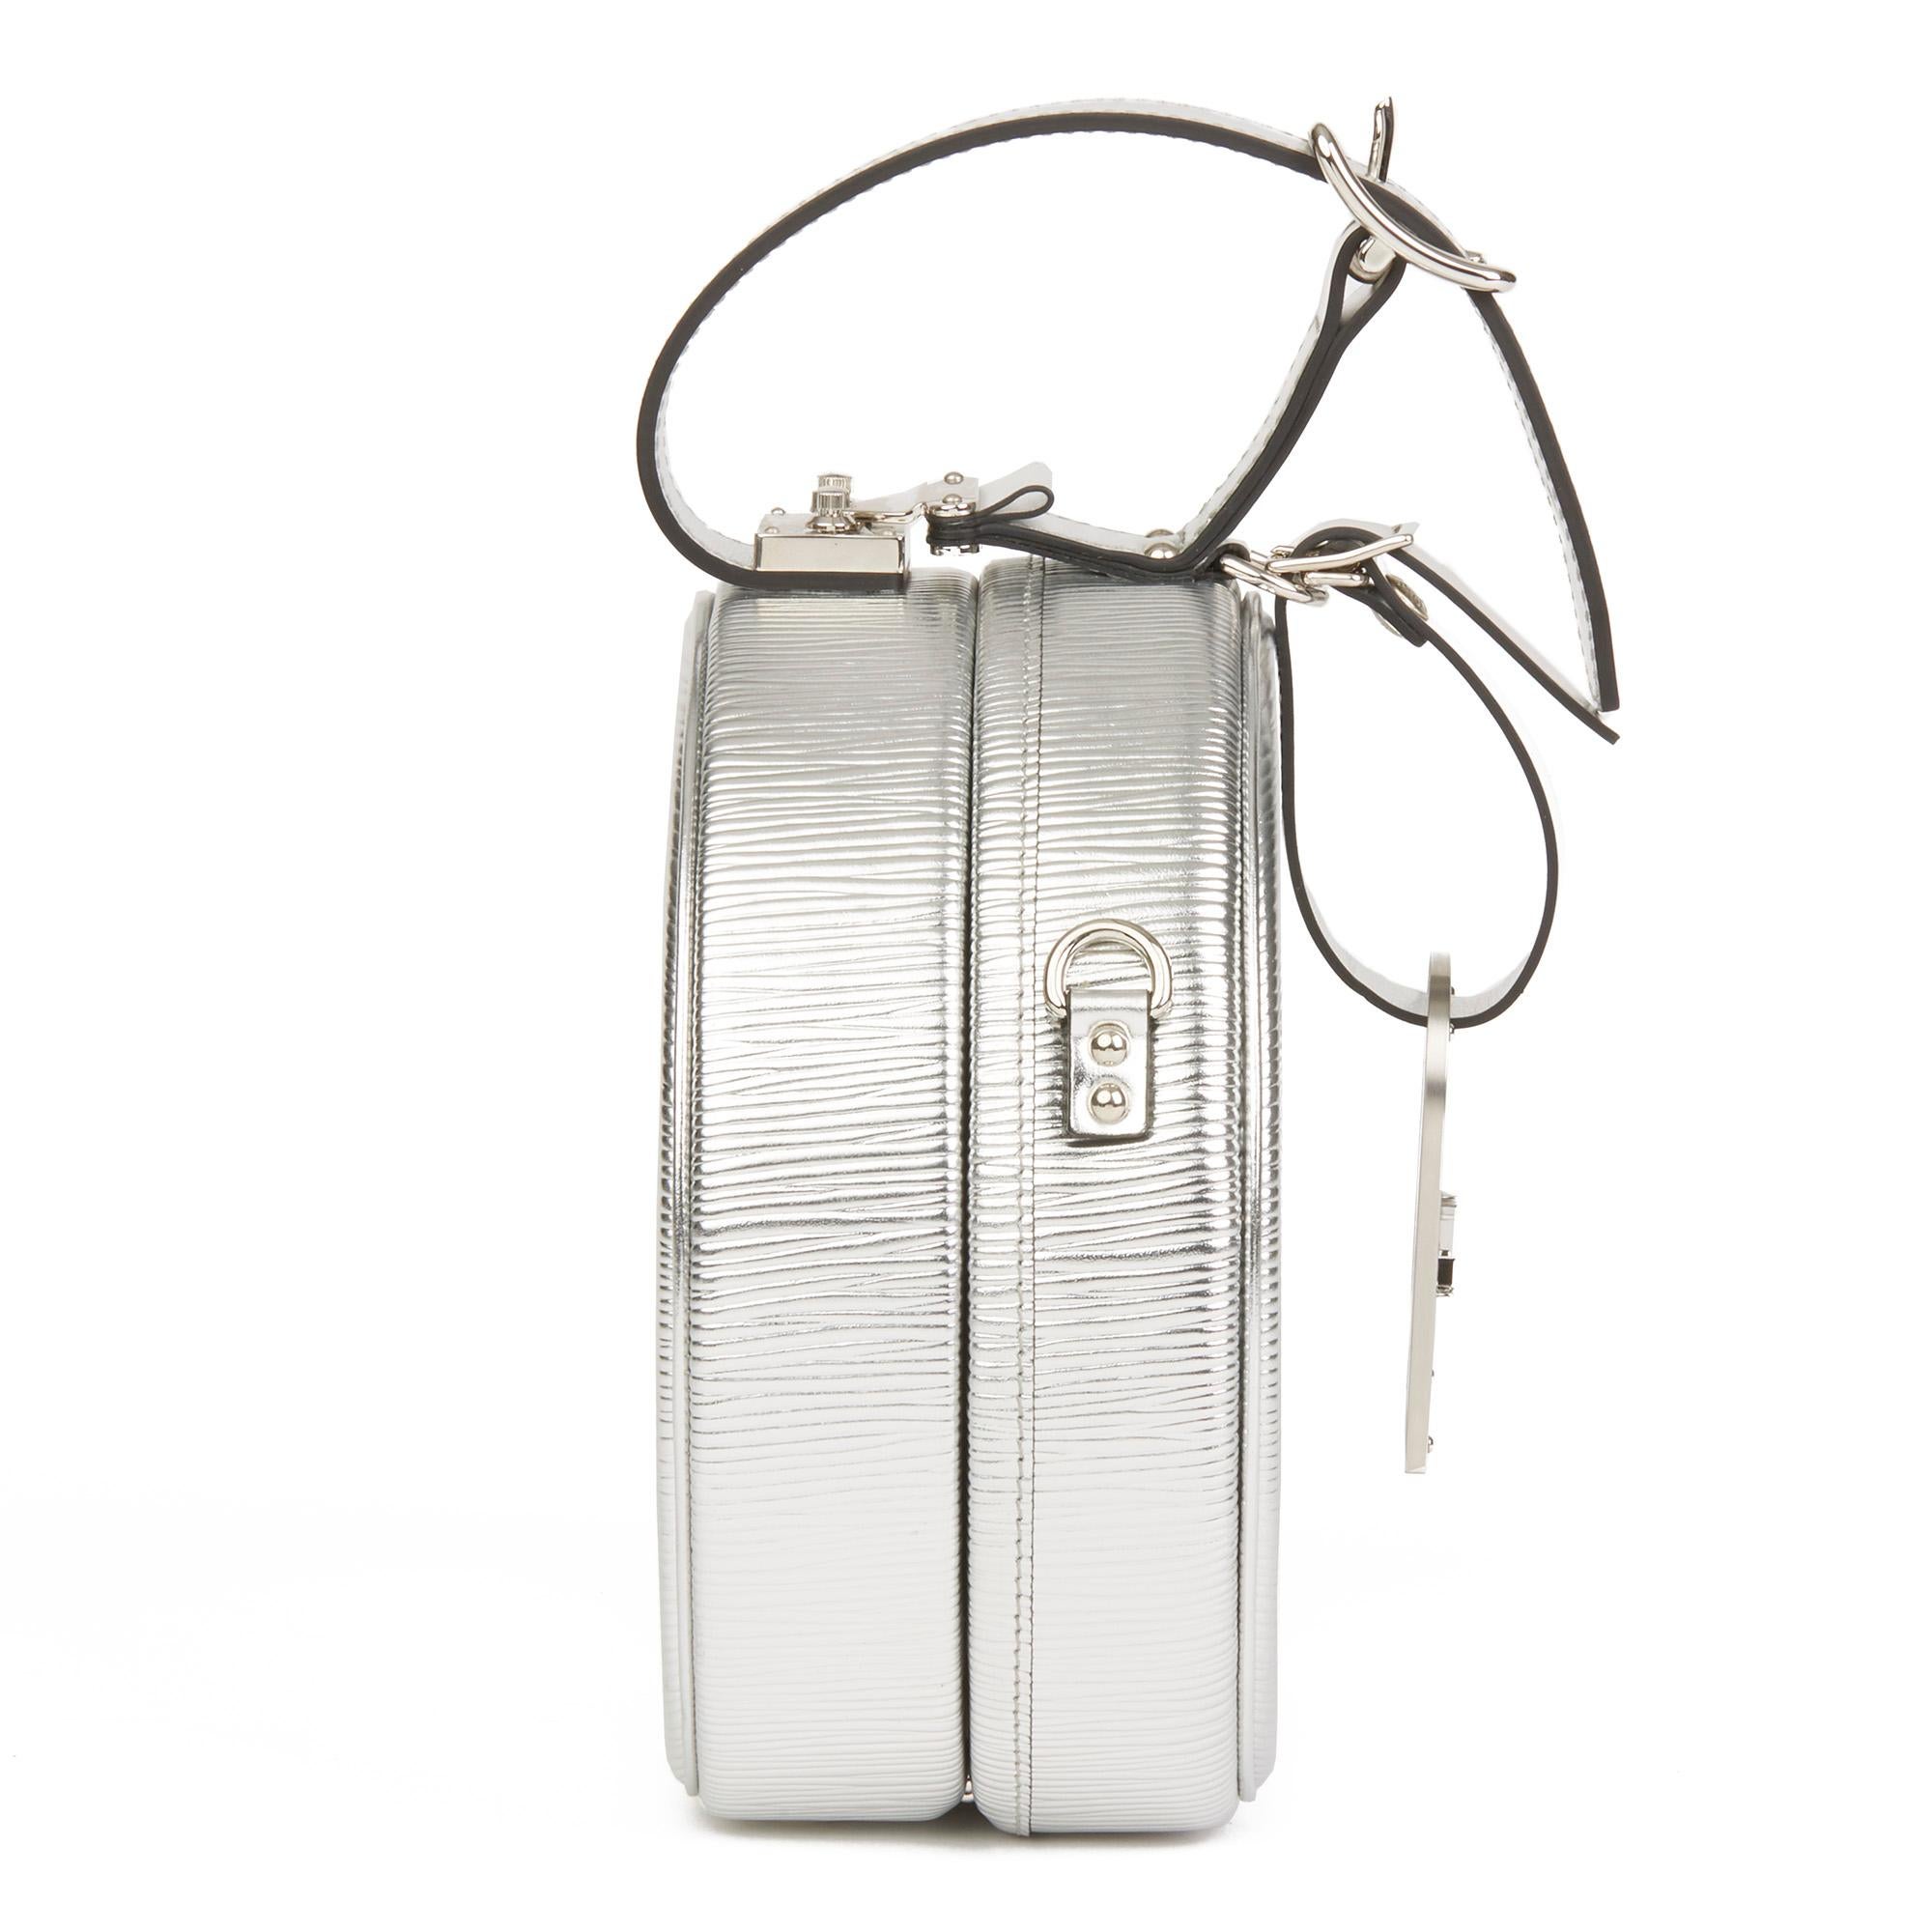 LOUIS VUITTON
Silver Metallic Epi Leather Petite Boite Chapeau

Reference: HB2830
Serial Number: PL5107
Age (Circa): 2017
Accompanied By: Louis Vuitton Dust Bag, Luggage Tag, Shoulder Strap
Authenticity Details: Date Stamp (Made in Italy)
Gender: